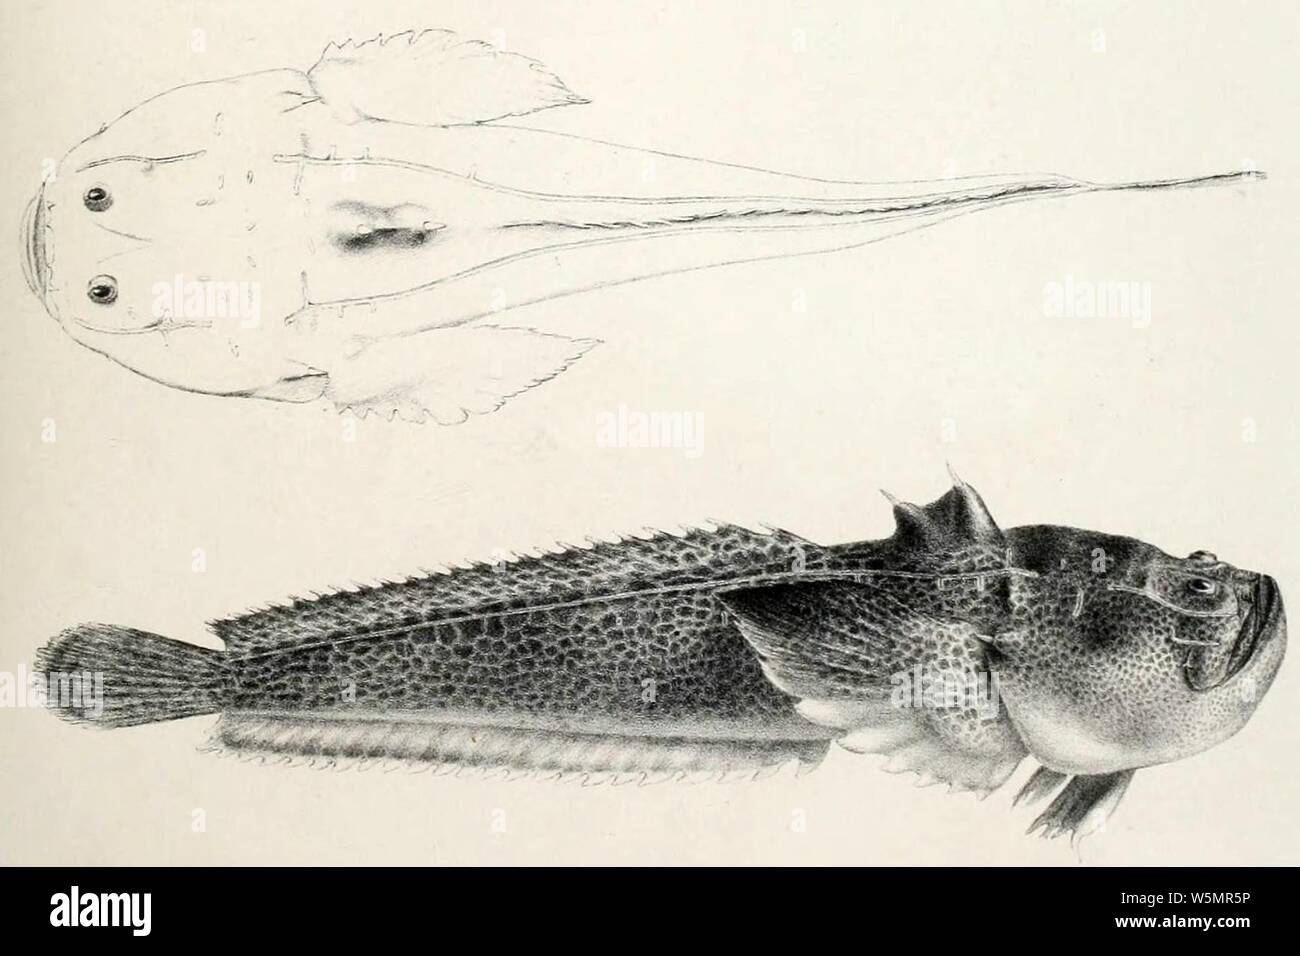 Daector reticulata Transactions of the Zoological Society of London (Pl. 68) (7408565536). Stock Photo